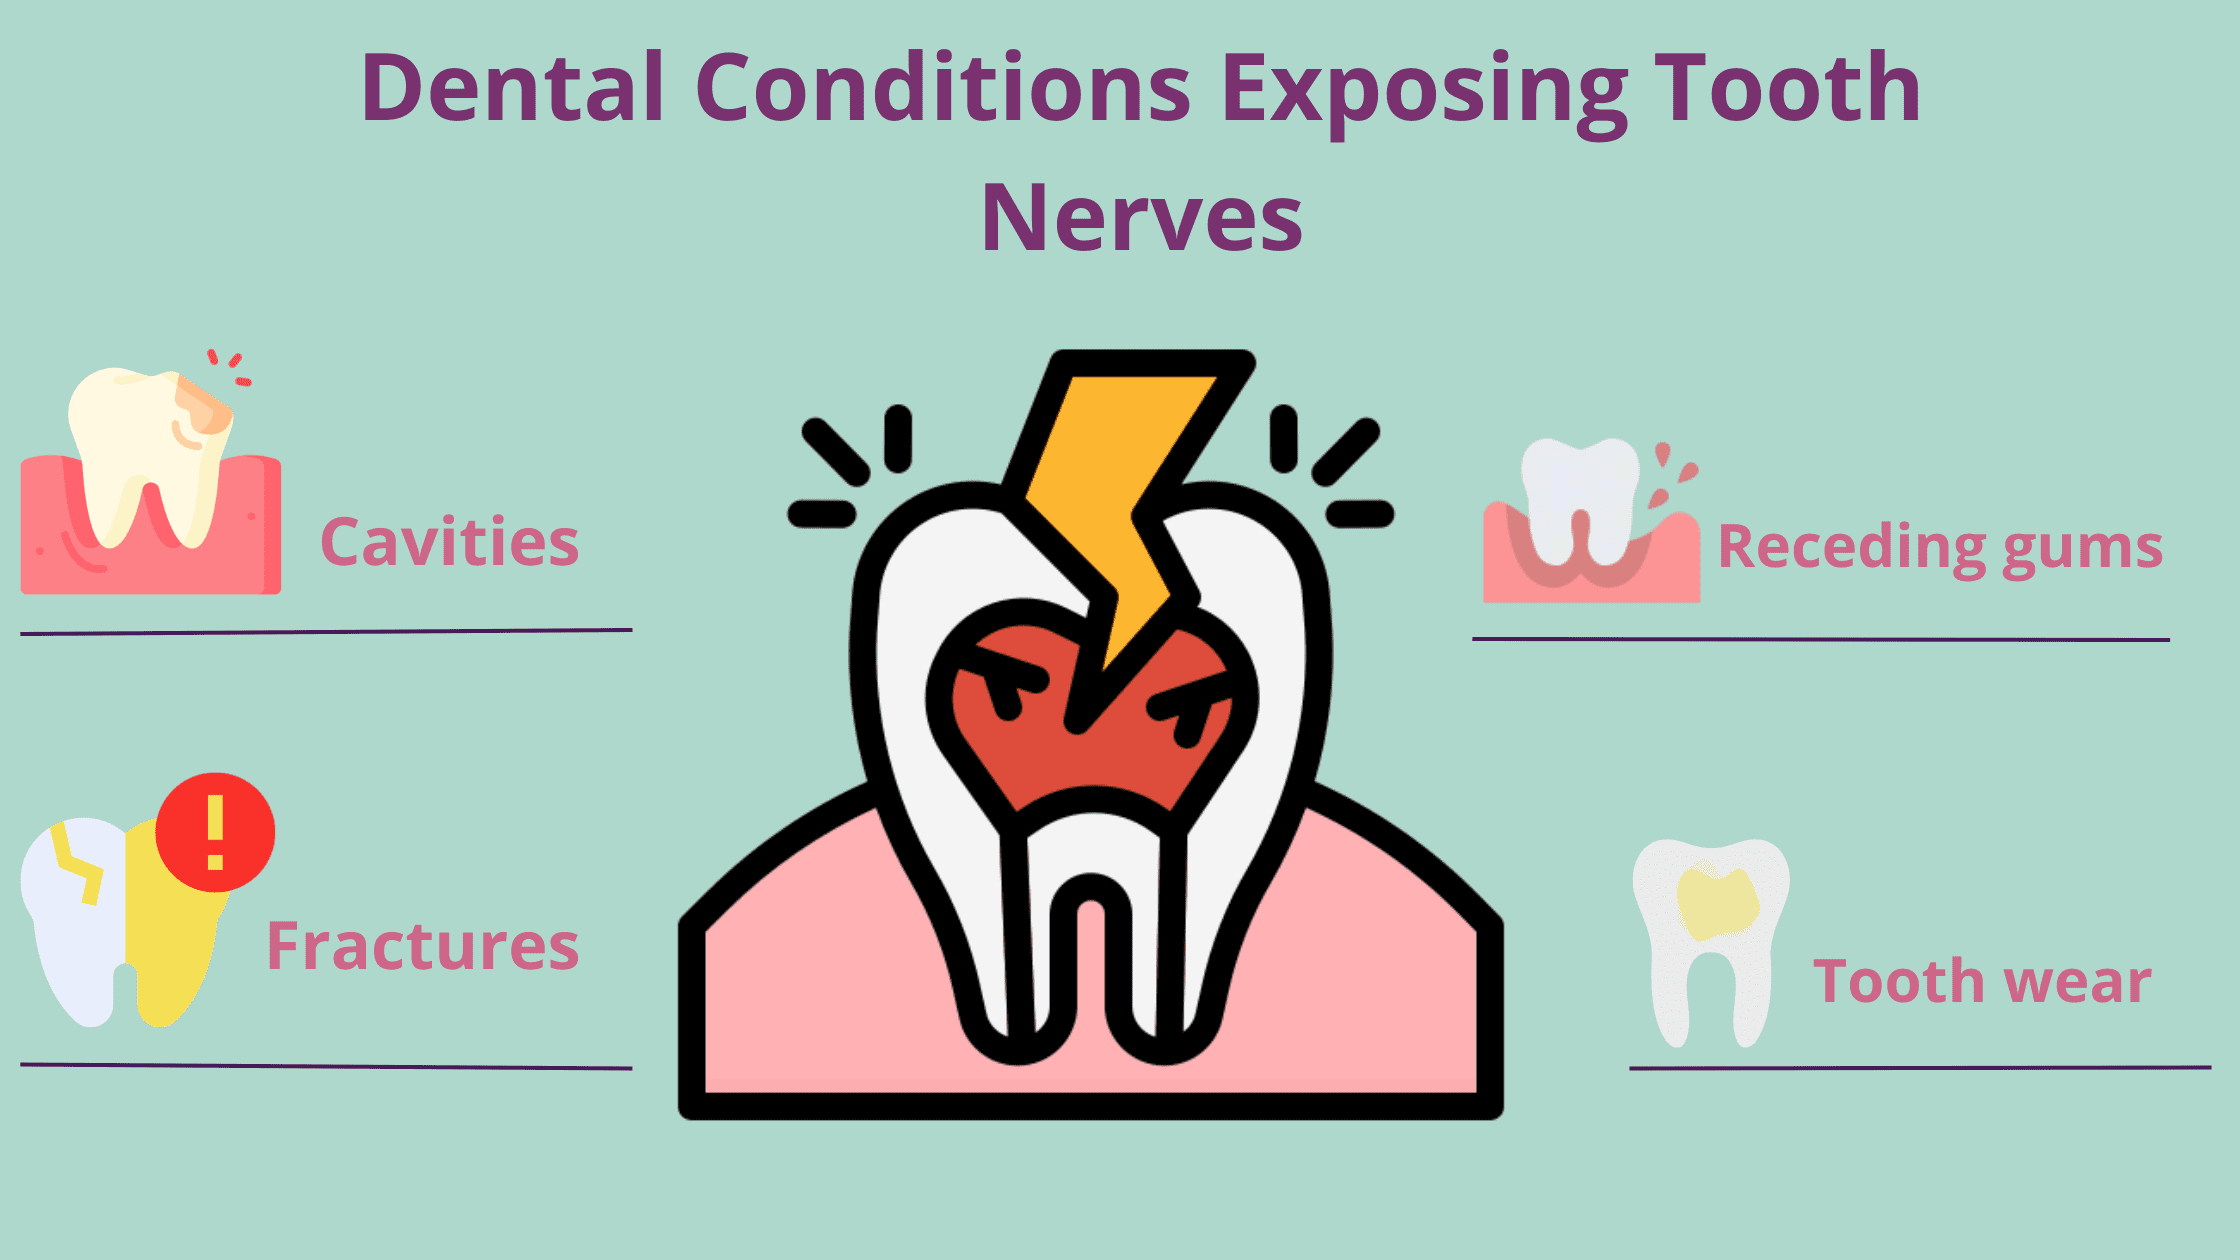 Dental conditions exposing tooth nerves